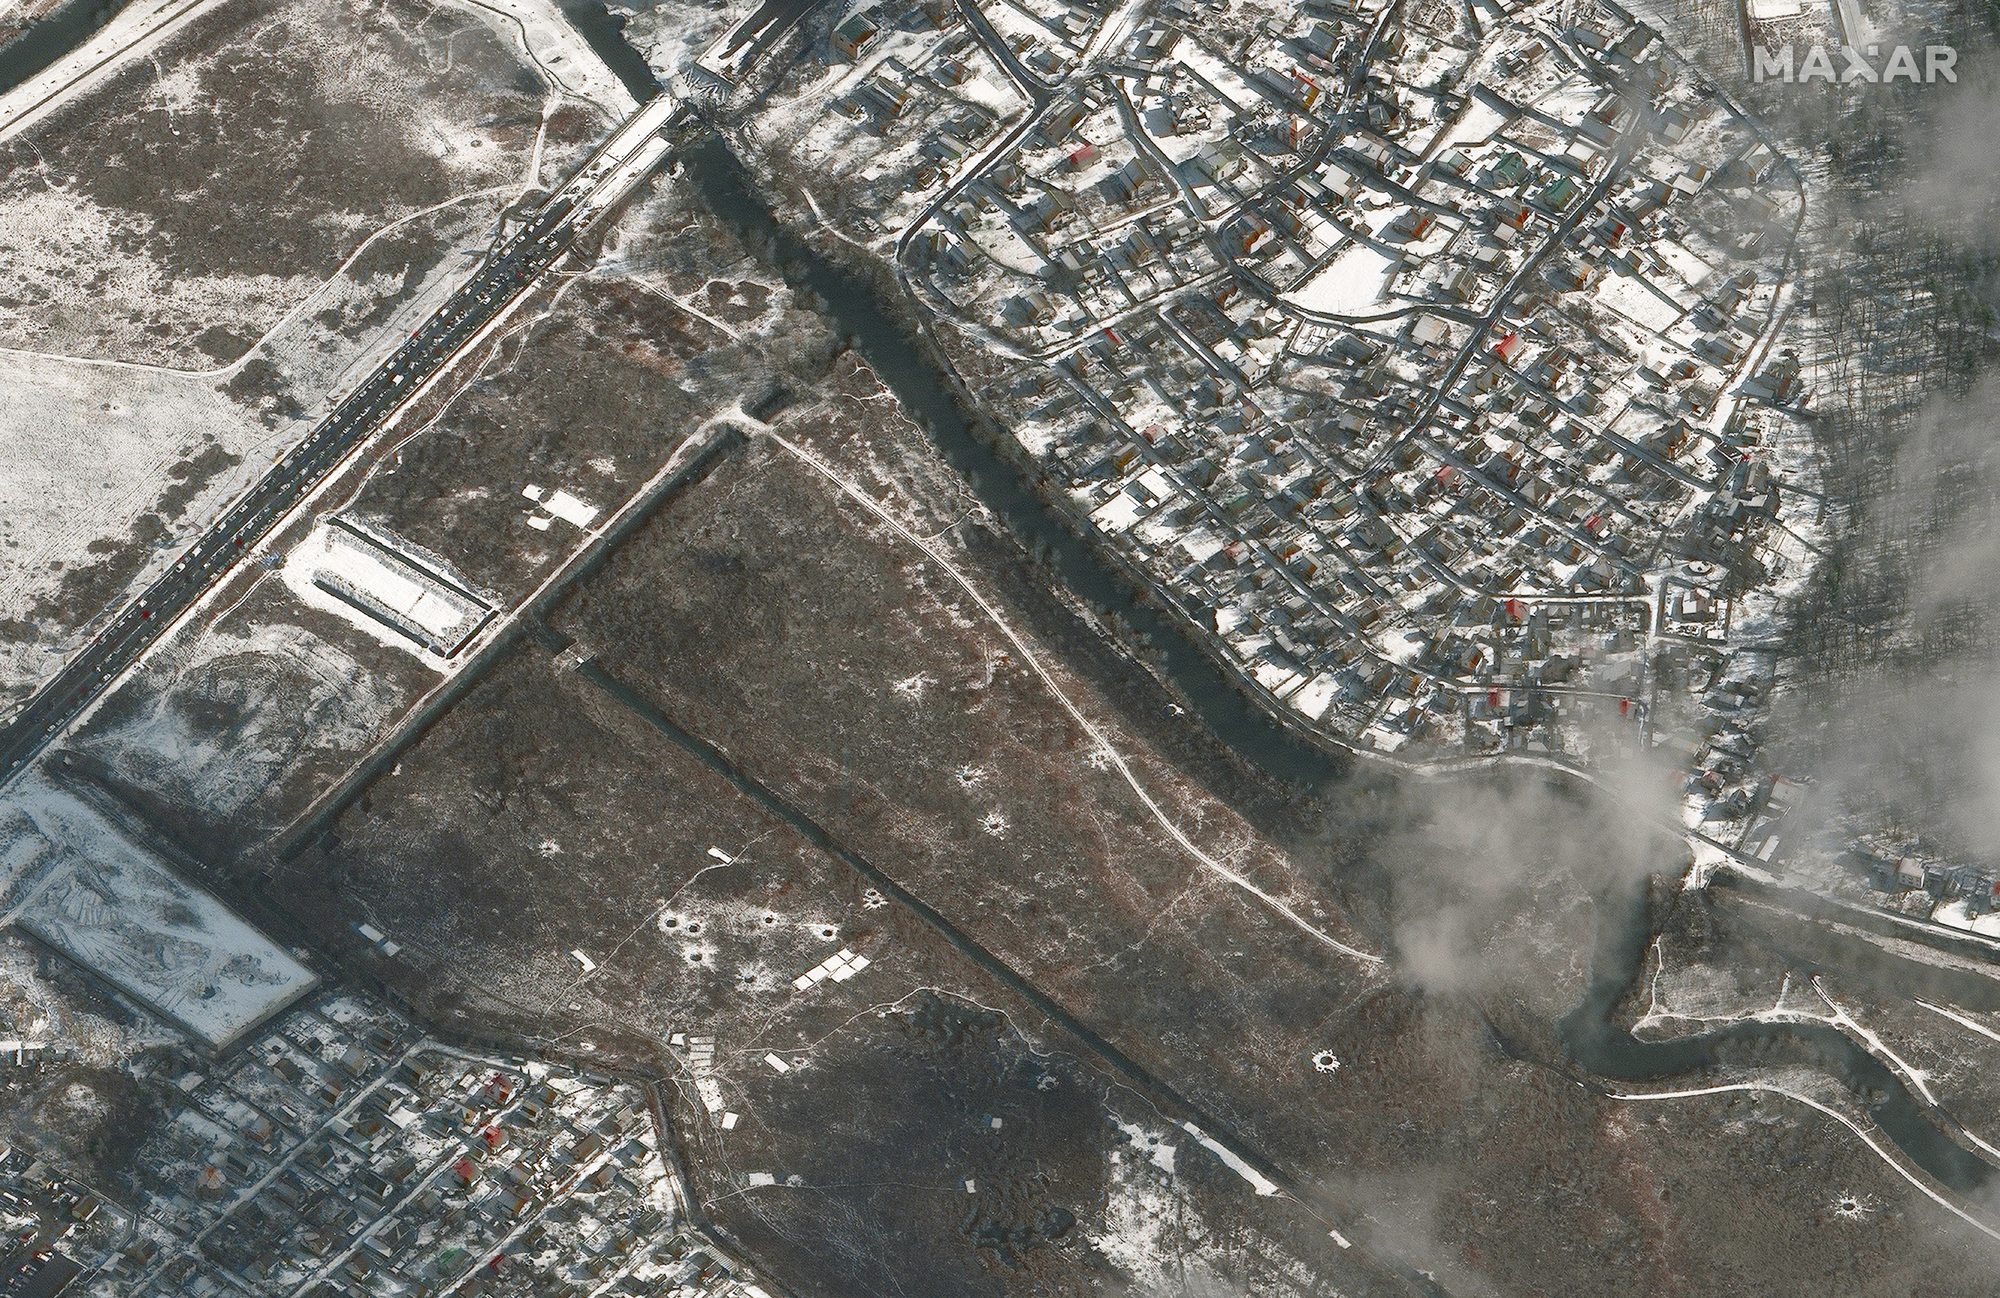 This satellite image shows a wide of the Irpin Bridge and craters in a surrounding field west of Kyiv, Ukraine on March 8, 2022 as seen by Maxar's WorldView 3 satellite.